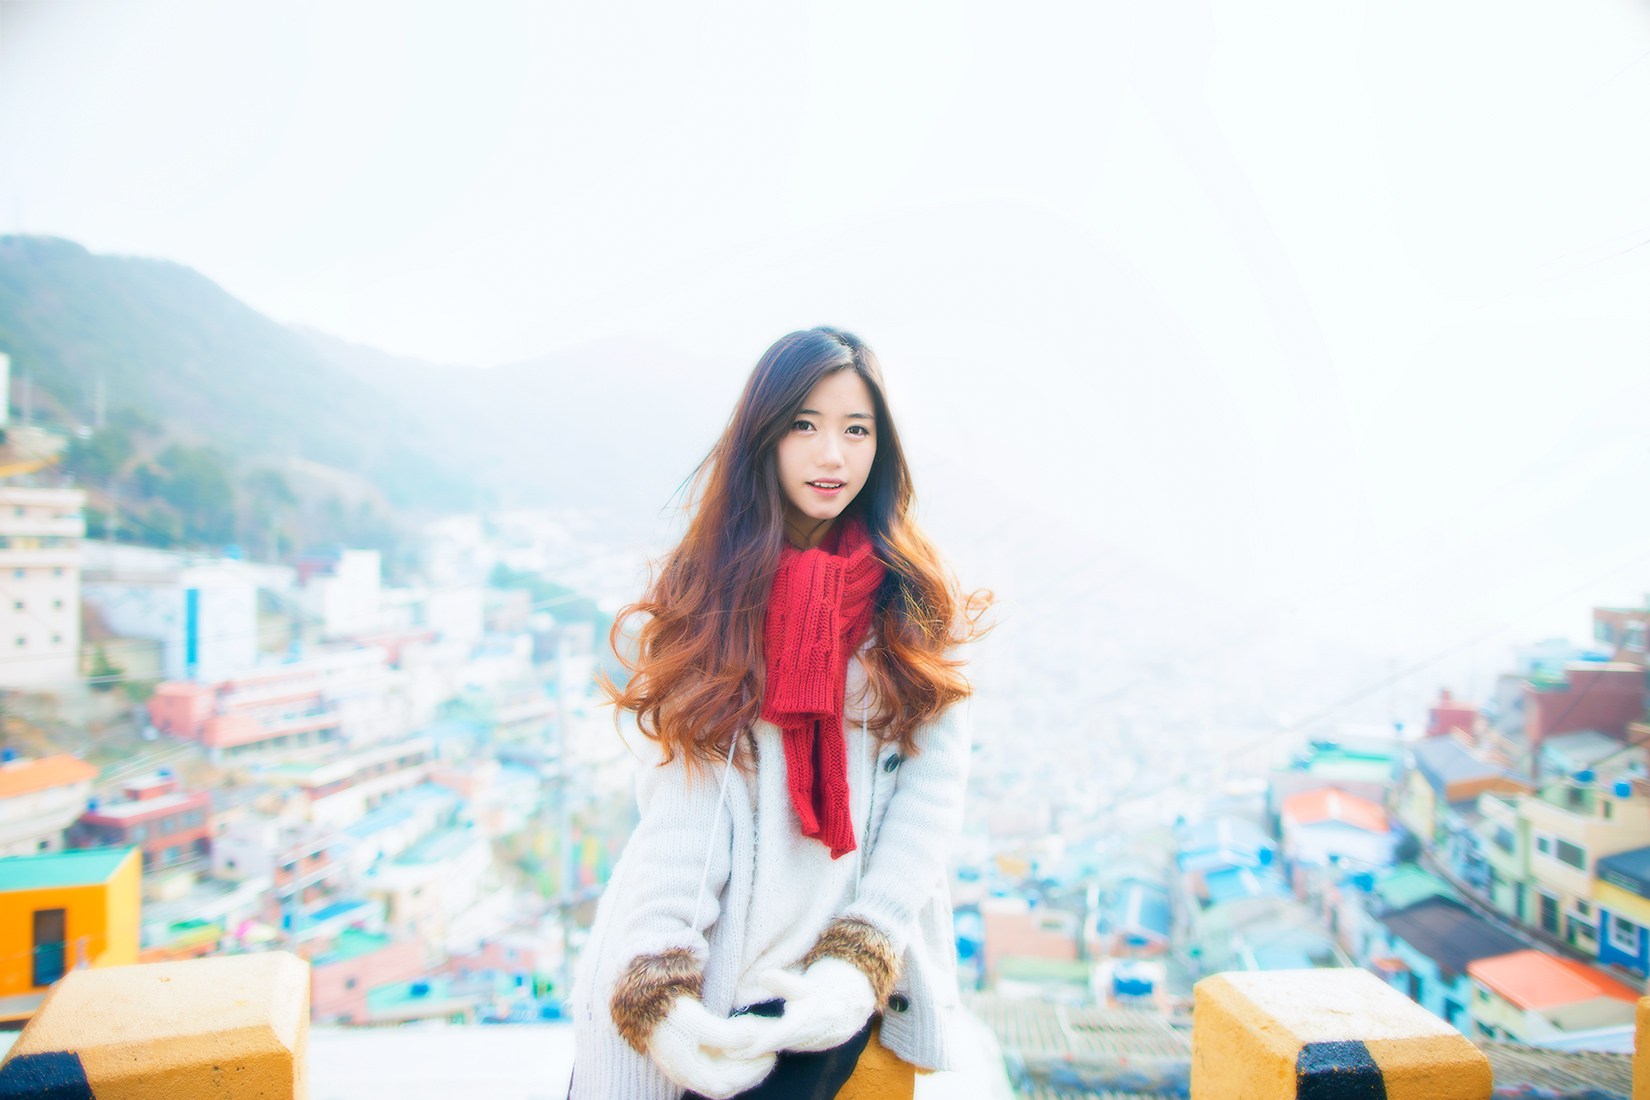 This cute instagrammer is actually hiding one of Korea’s sexiest bodies